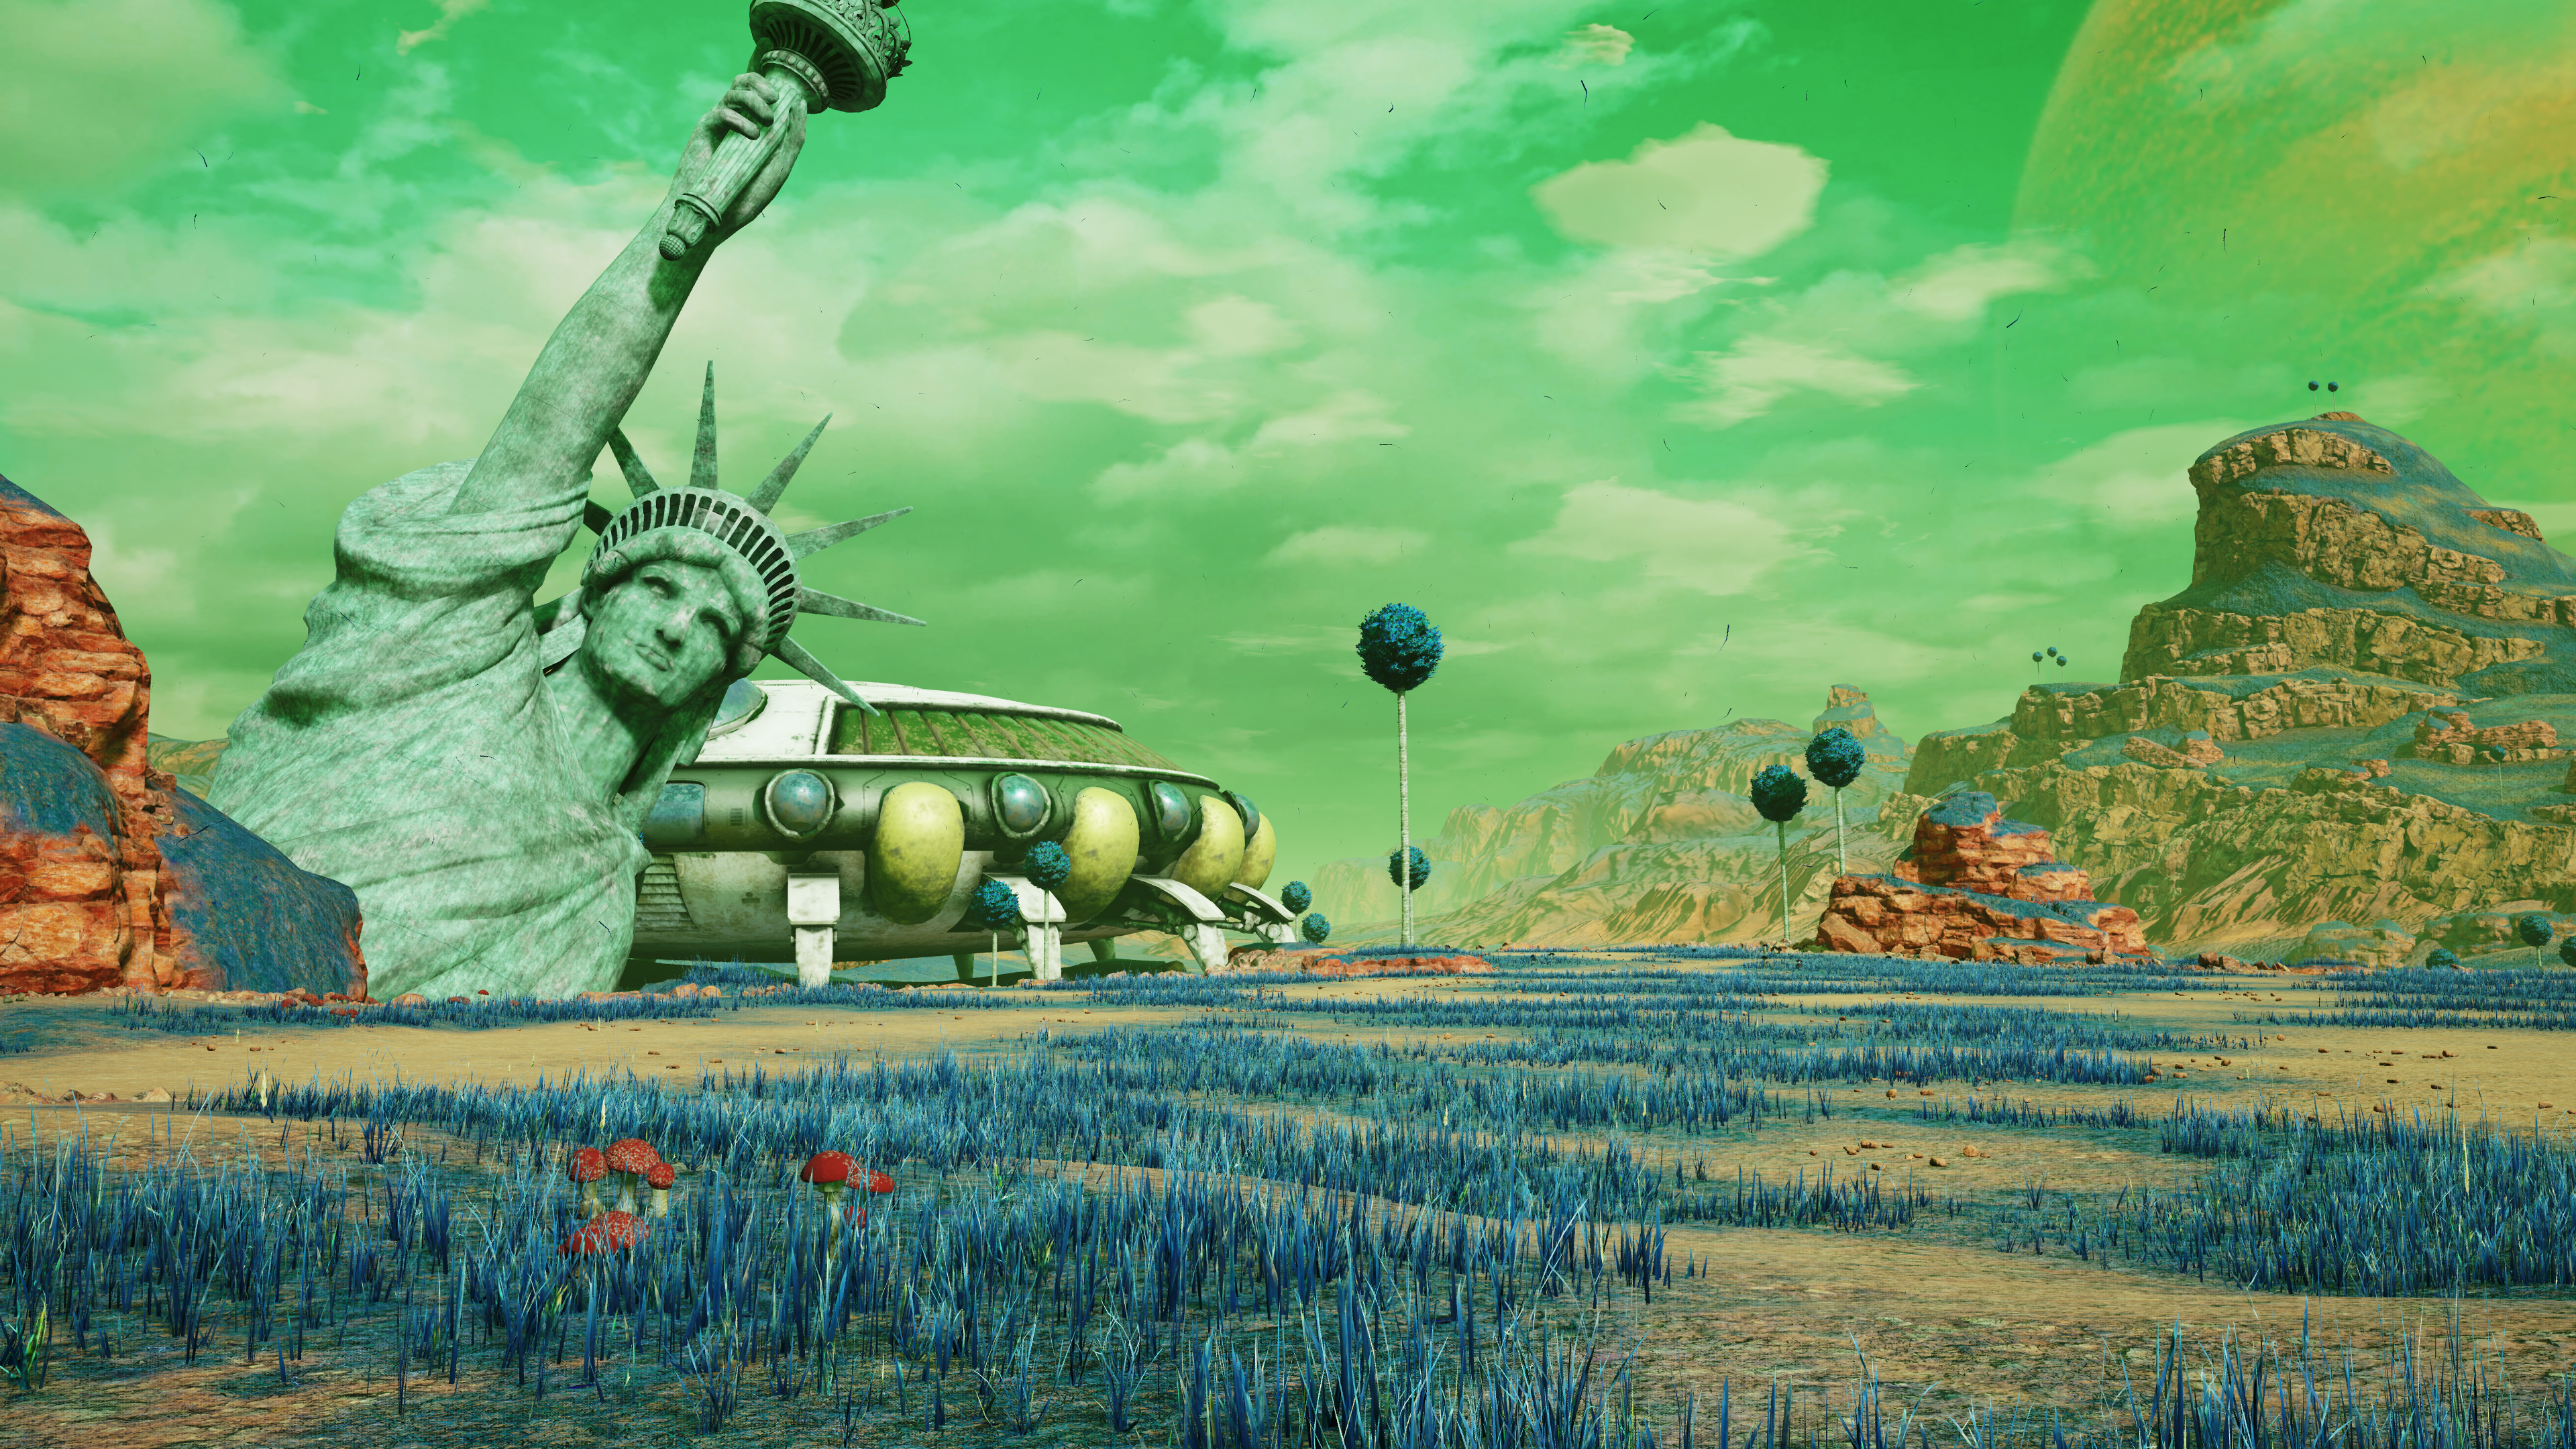 The Statue of Liberty sank into the ground on Namek